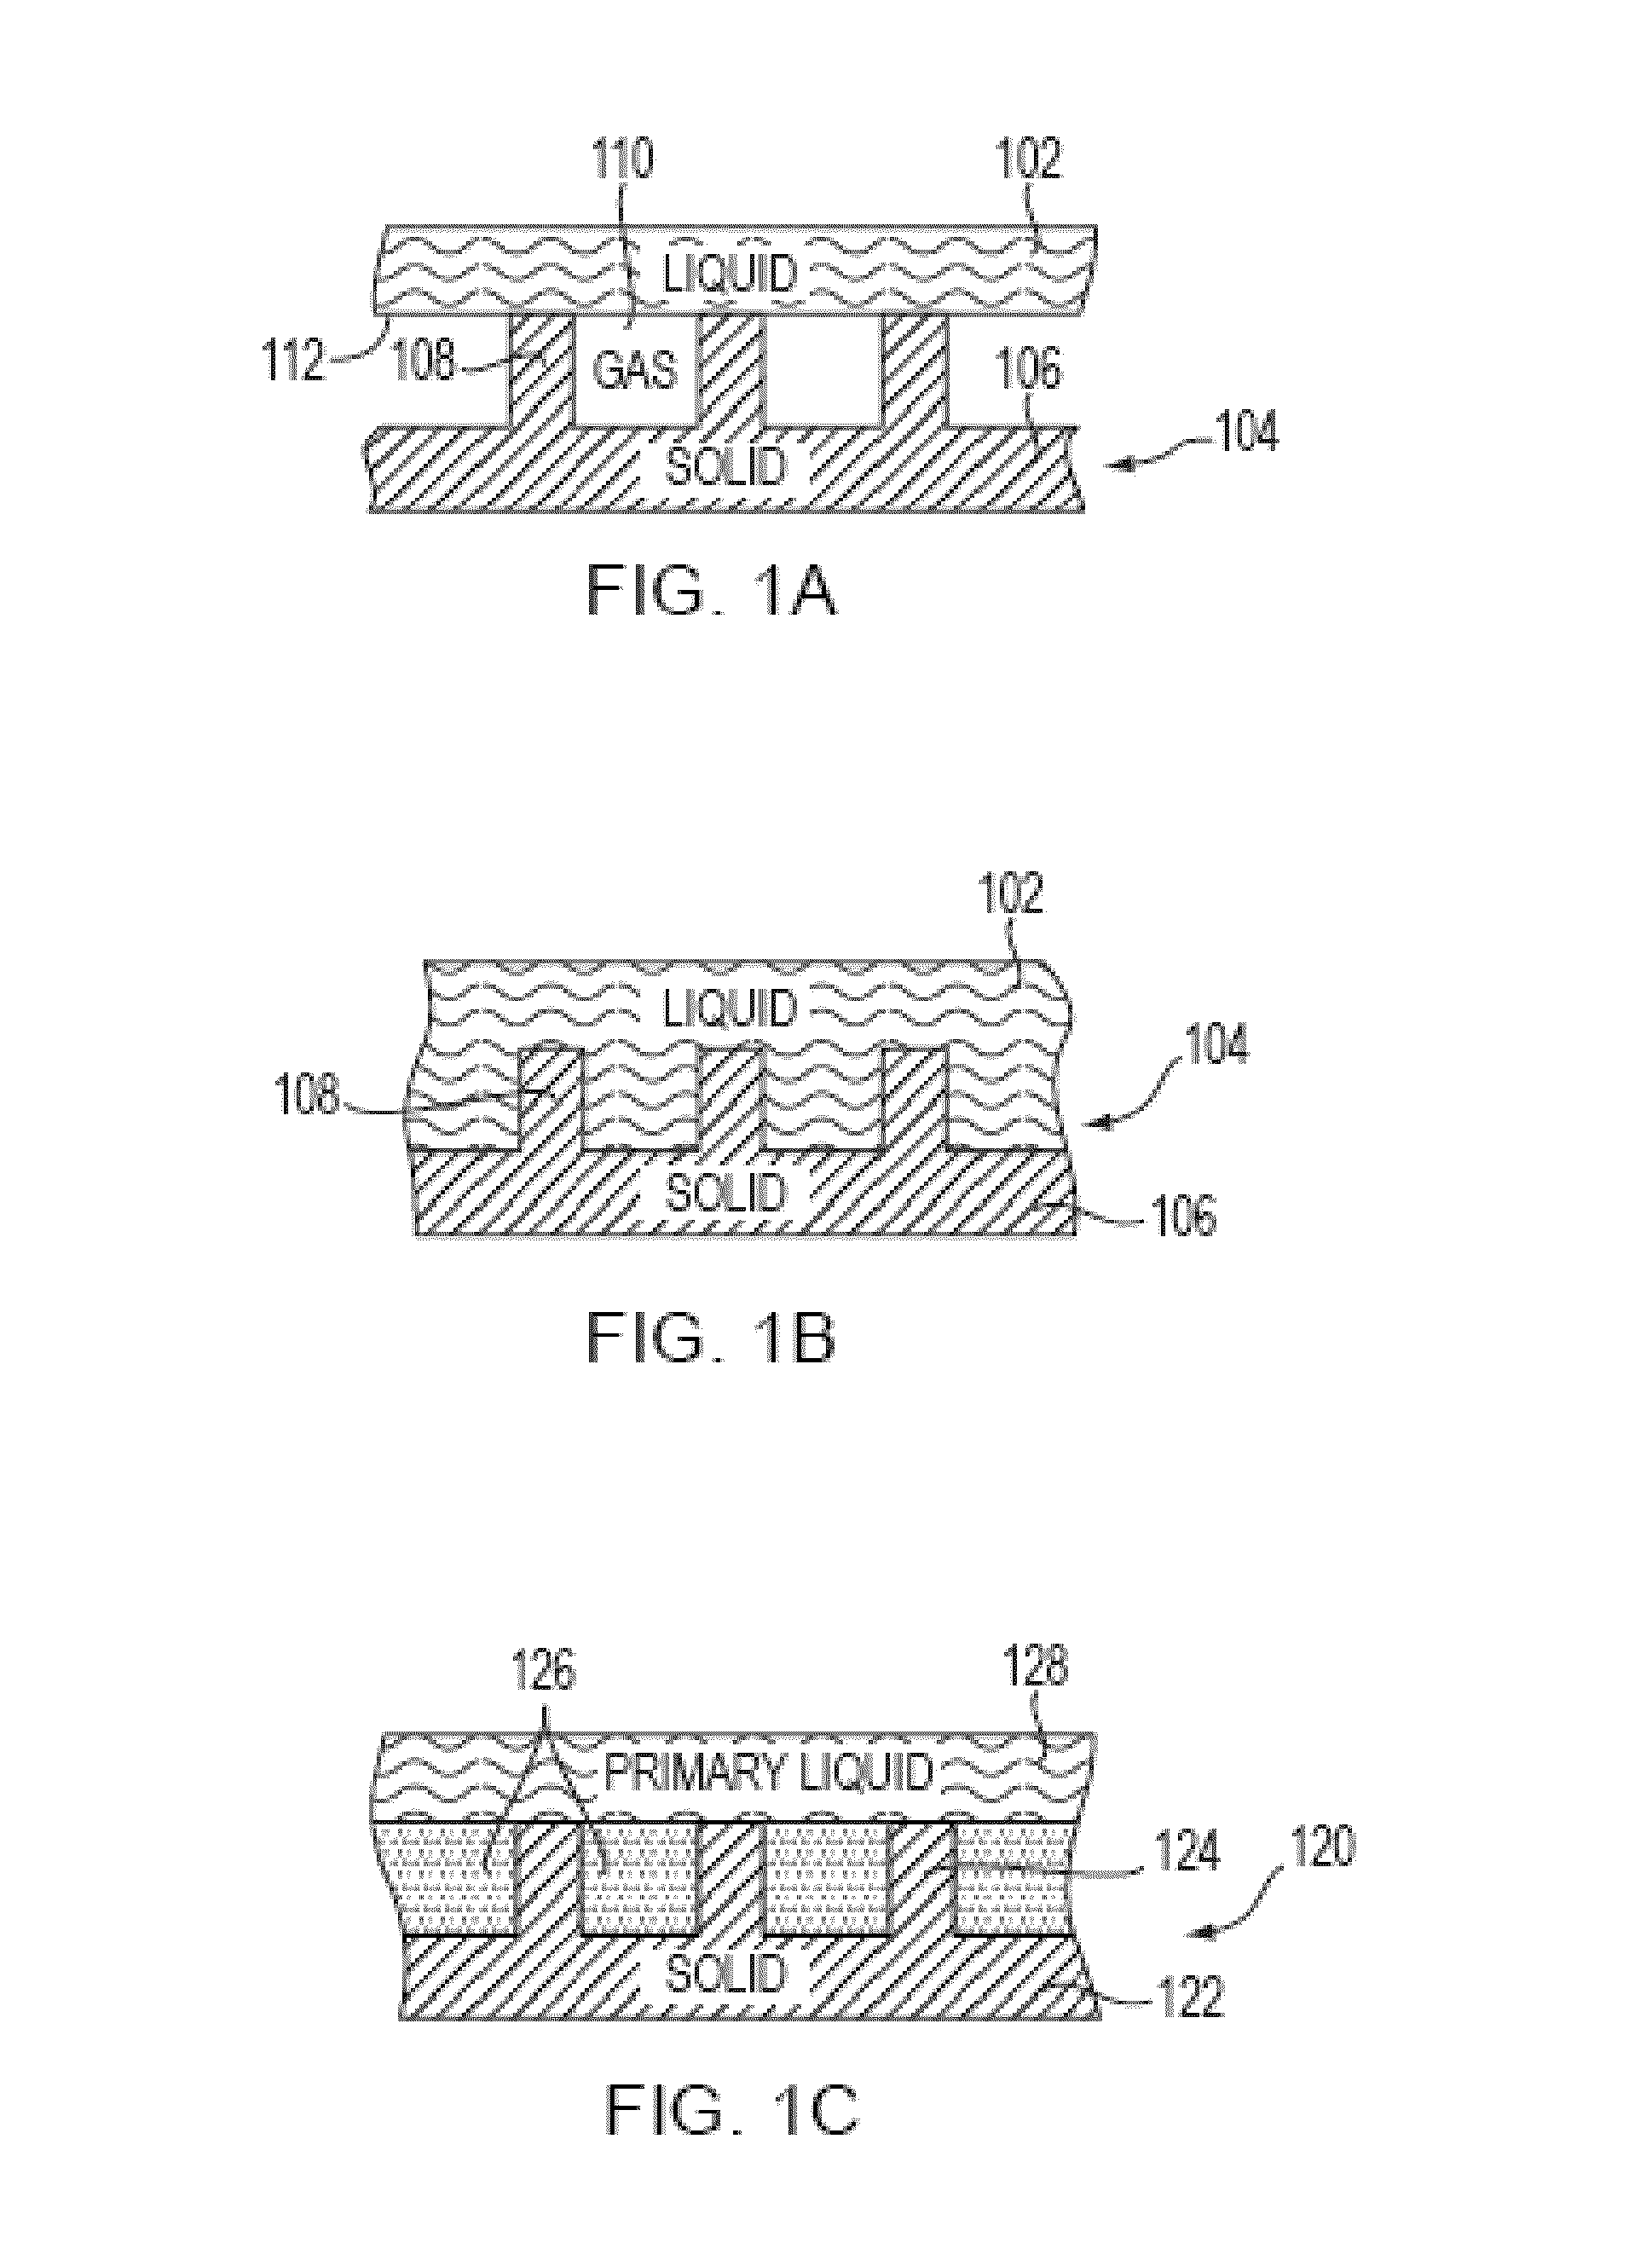 Self-lubricating surfaces for food packaging and food processing equipment